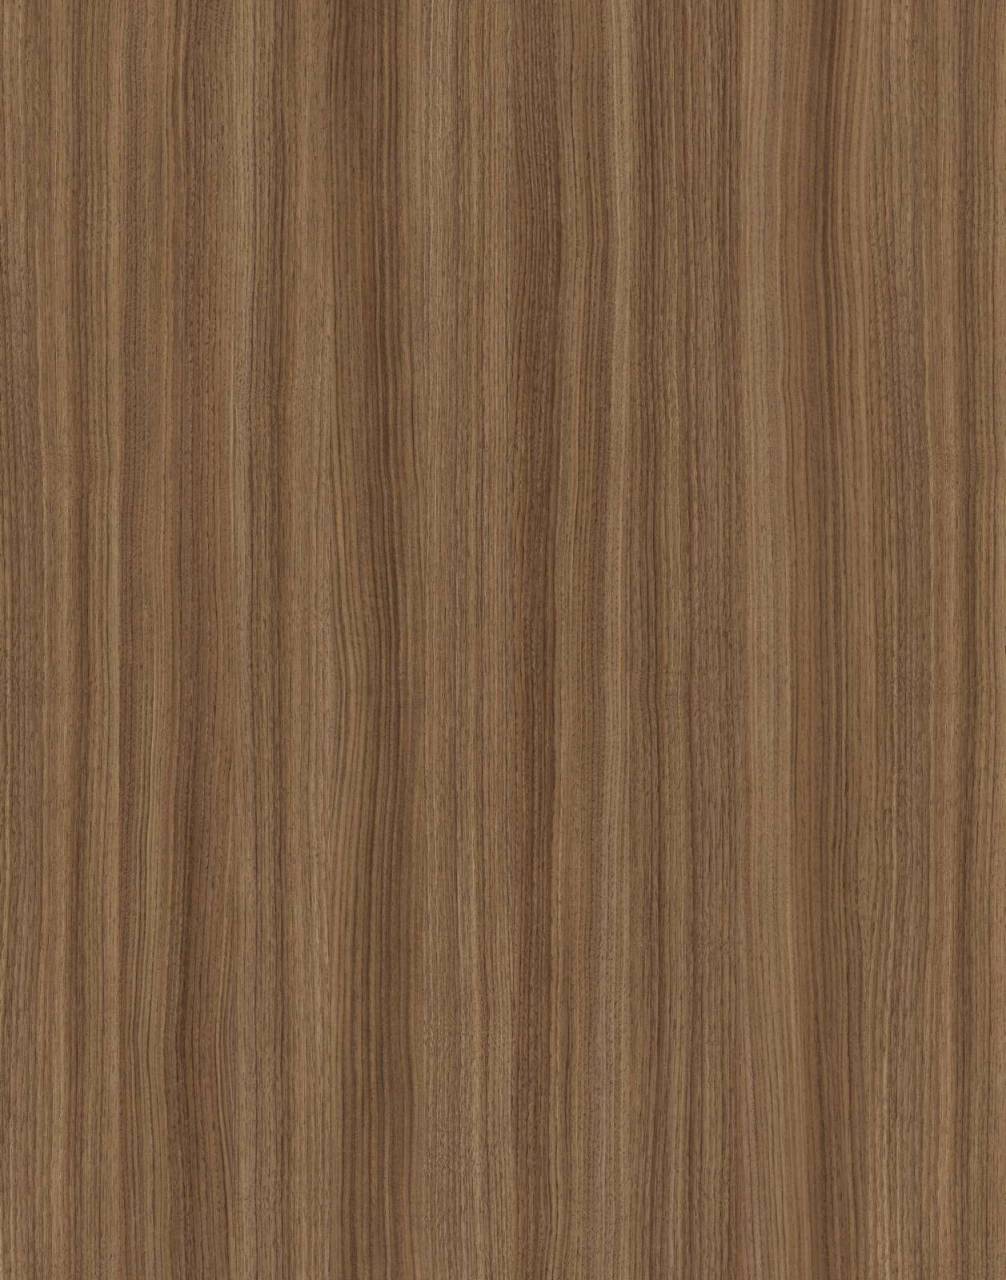 Close-up of K546 Caramel Franklin Walnut sample, featuring rich caramel brown color and lustrous surface.